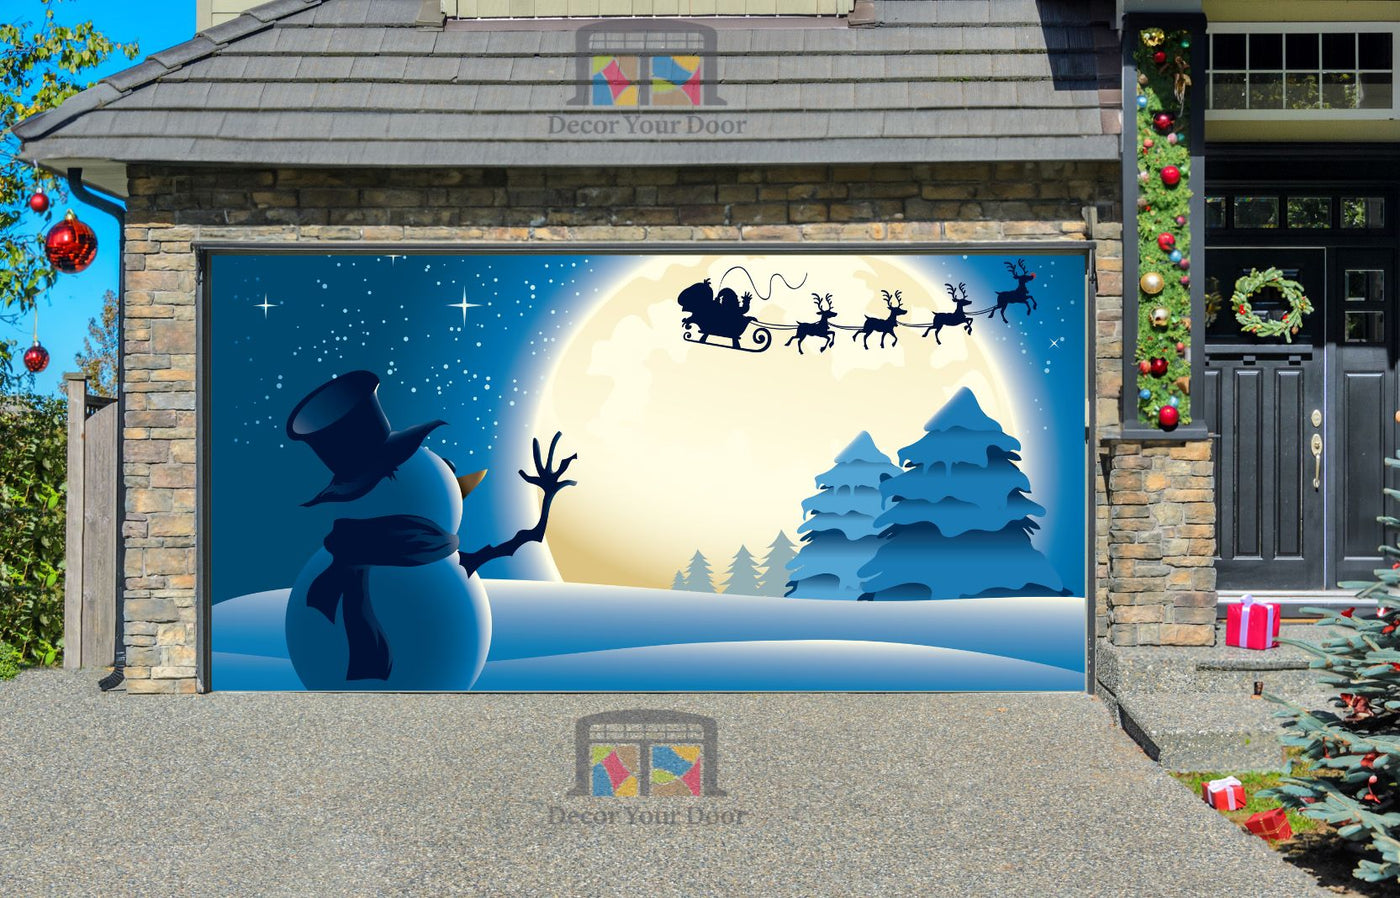 Lonely Snowman Waving to Santa Sleigh Garage Door Wrap Cover Mural Decoration